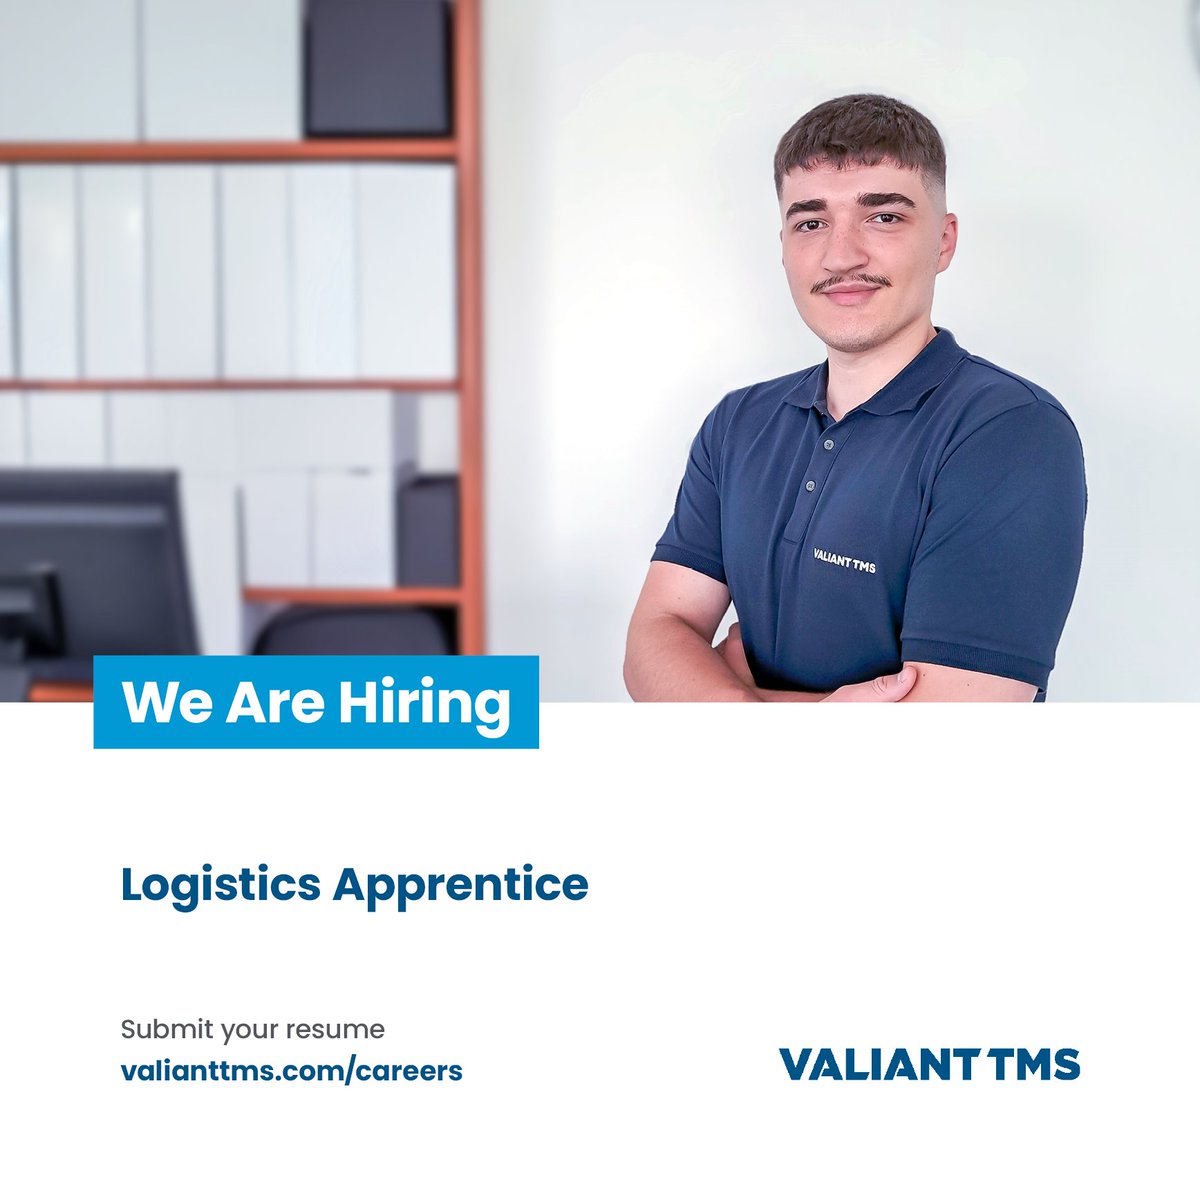 Join our team in Linz, Austria, as a Logistics Apprentice! You’ll gain hands-on experience in our end-to-end supply chain process and collaborate on exciting automation projects with a global dynamic team. Apply today. jobboerse.tms-at.com/engage/jobexch…